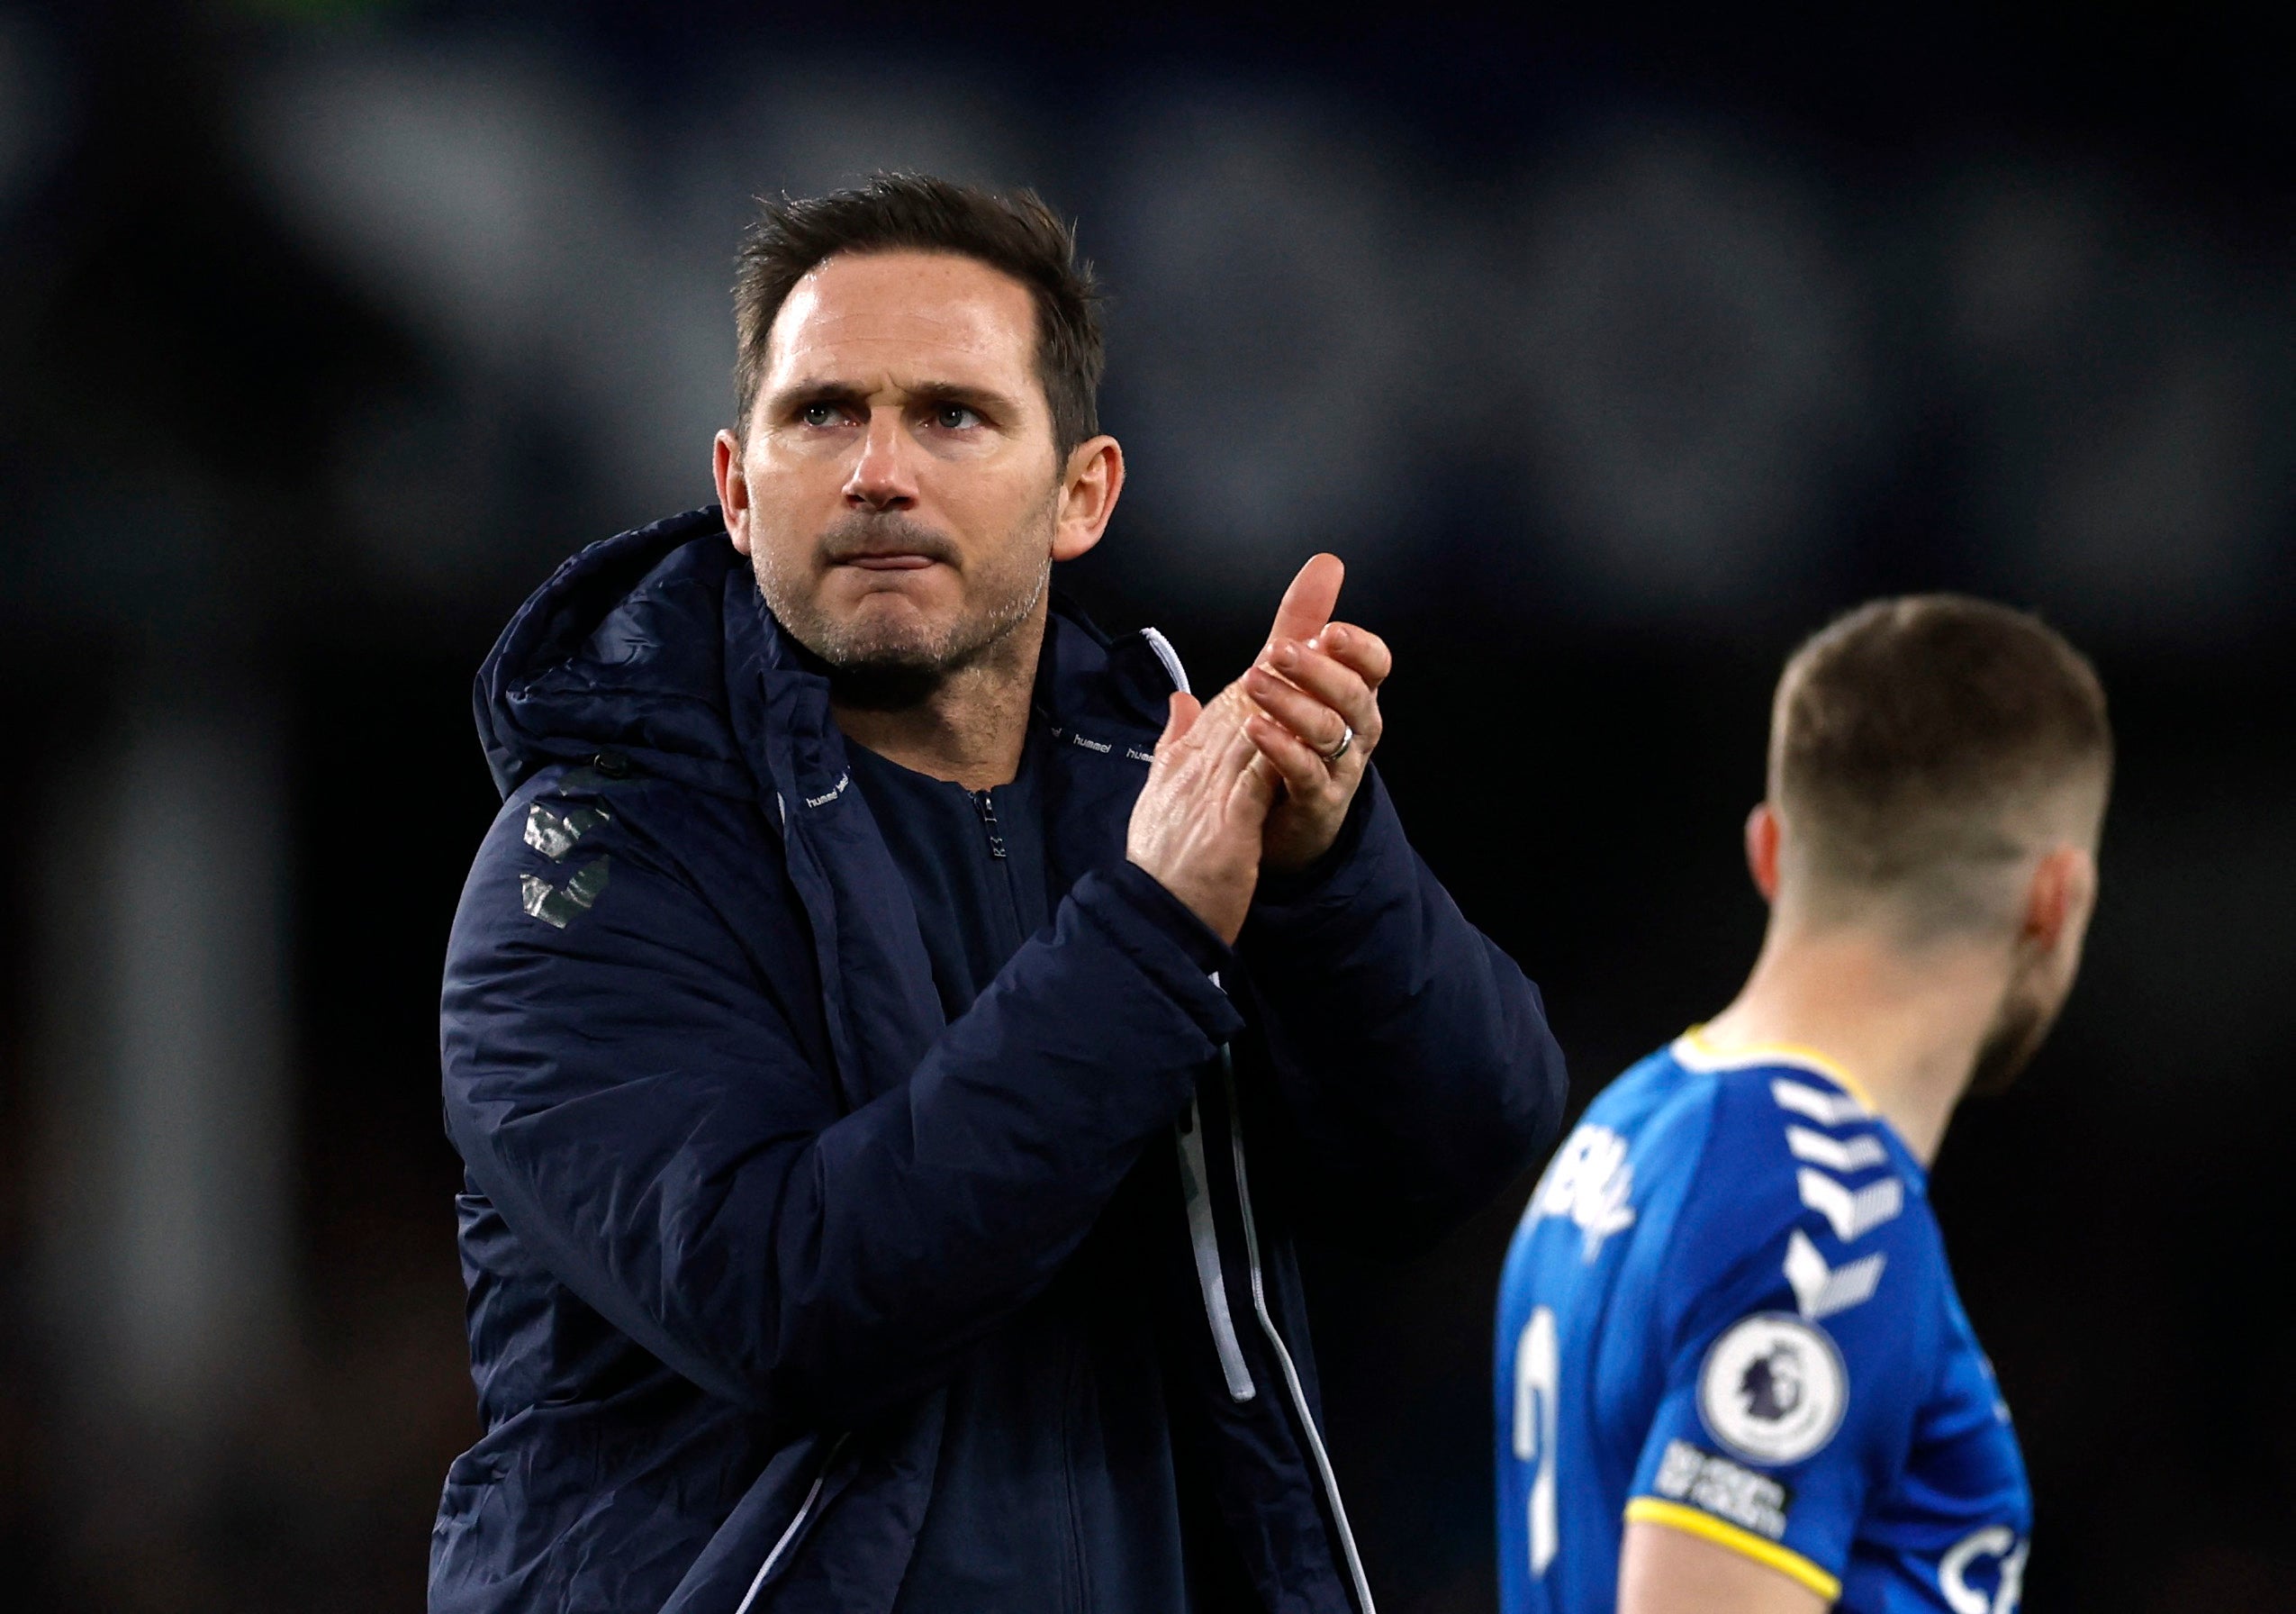 Lampard was frustrated by the decision not to award Everton a penalty in their defeat against Man City